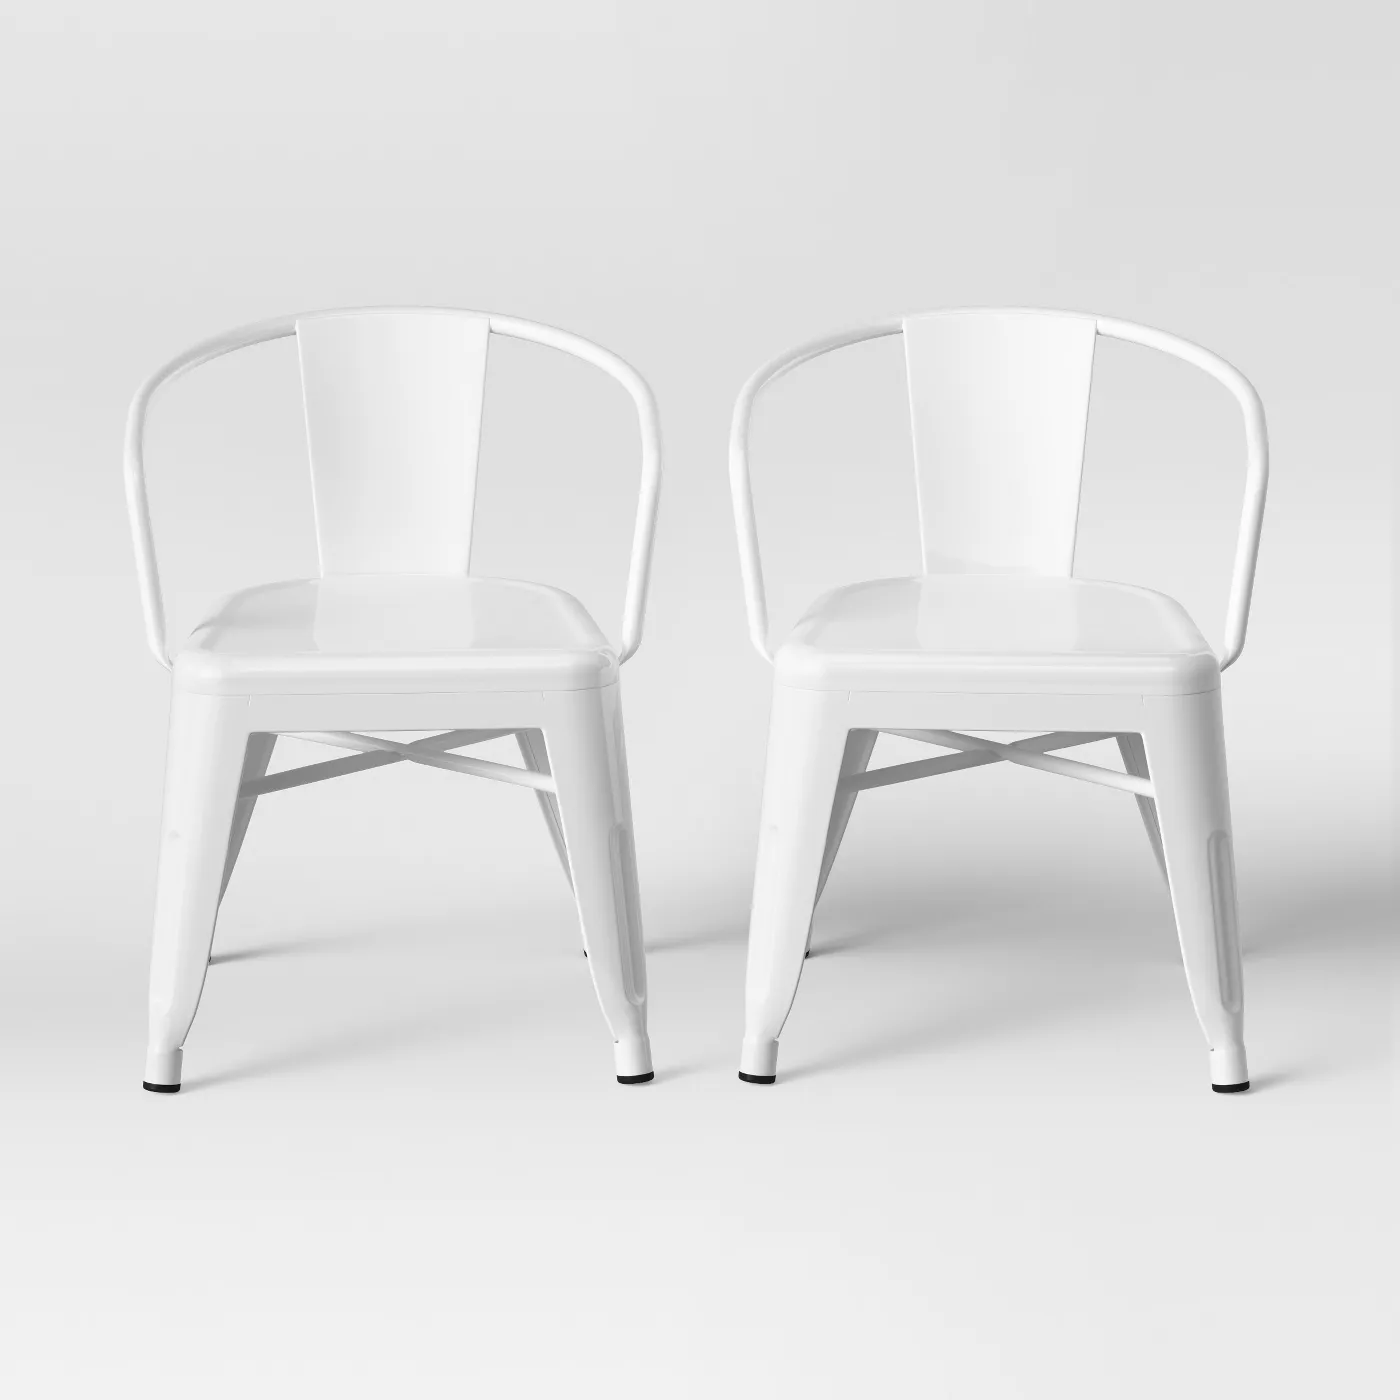 Shop Set of 2 Industrial Activity Chairs from Target on Openhaus